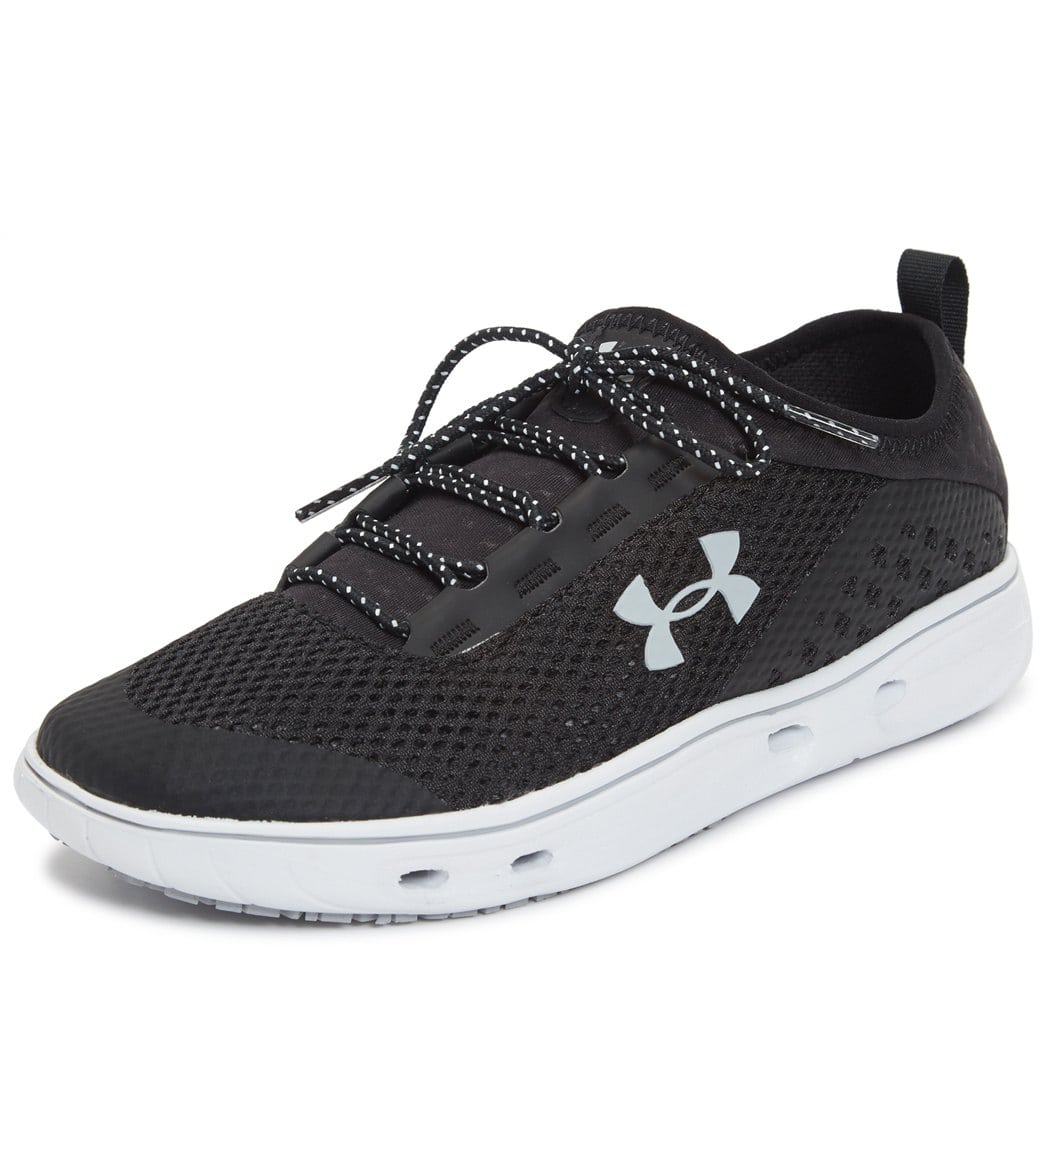 under armor kilchis water shoes